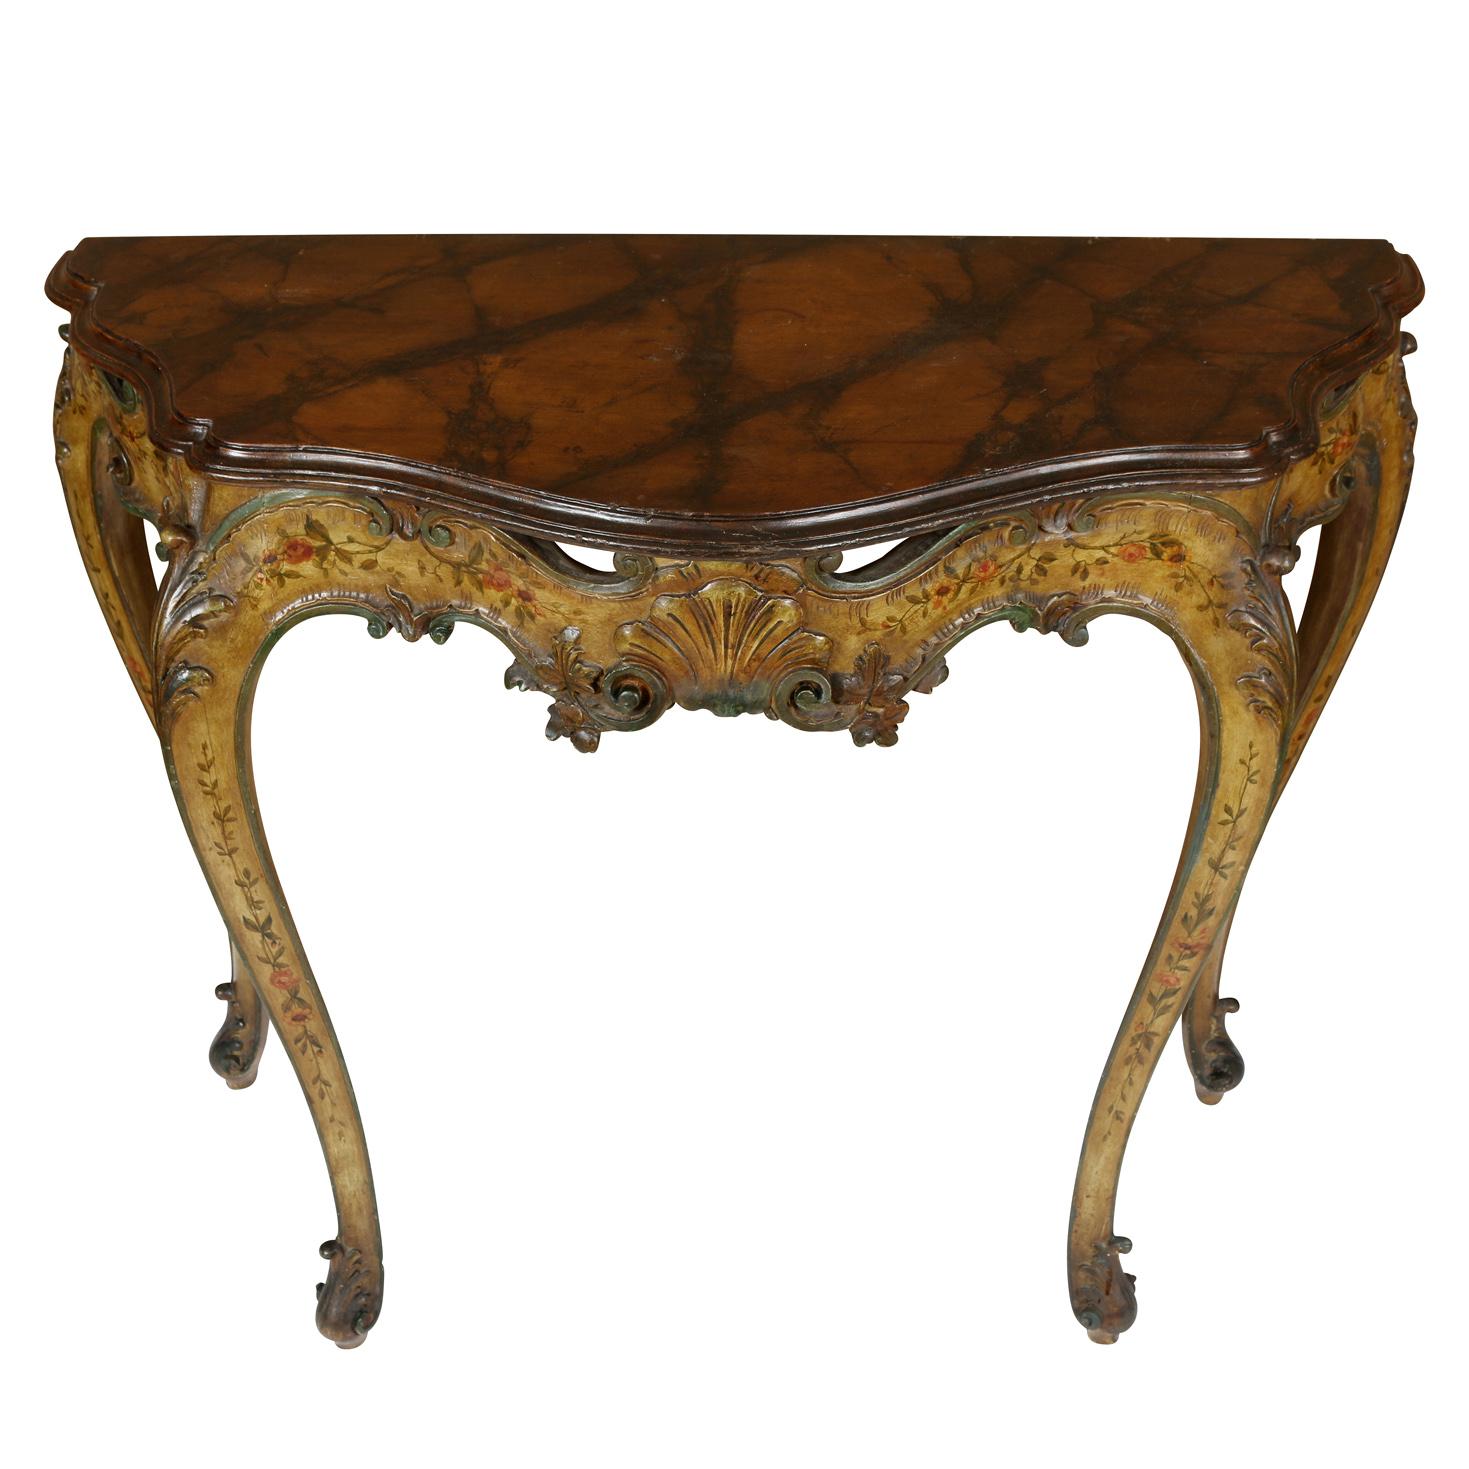 A pair of Italian rococo shaped and carved demi-lune console table with faux marble top, cabriole legs and floral painted details to apron